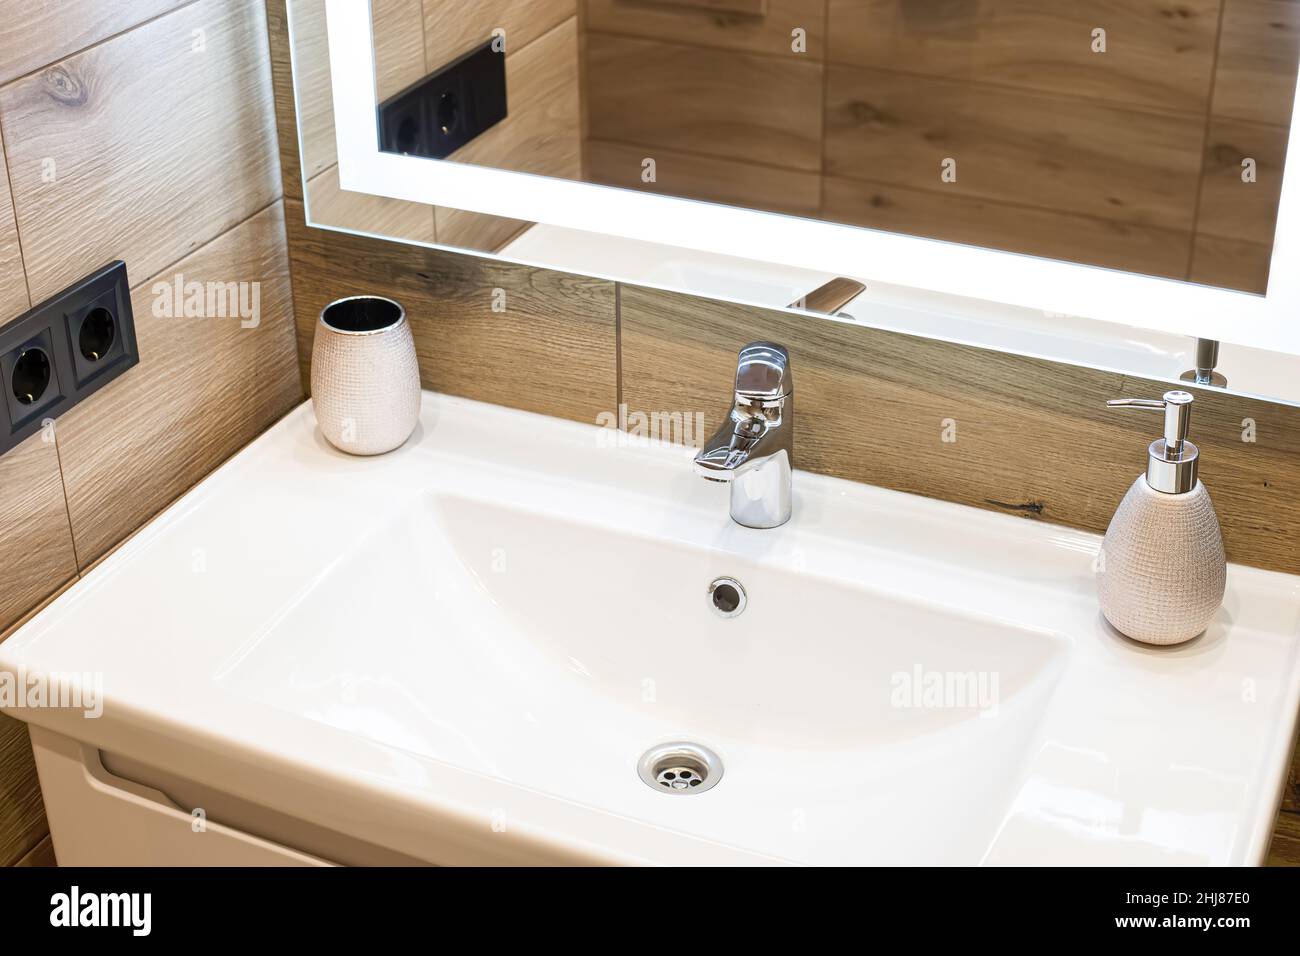 Modern washbasin with chrome faucet beside a stylish soap dispenser. Mirror with built-in led lighting. Stock Photo